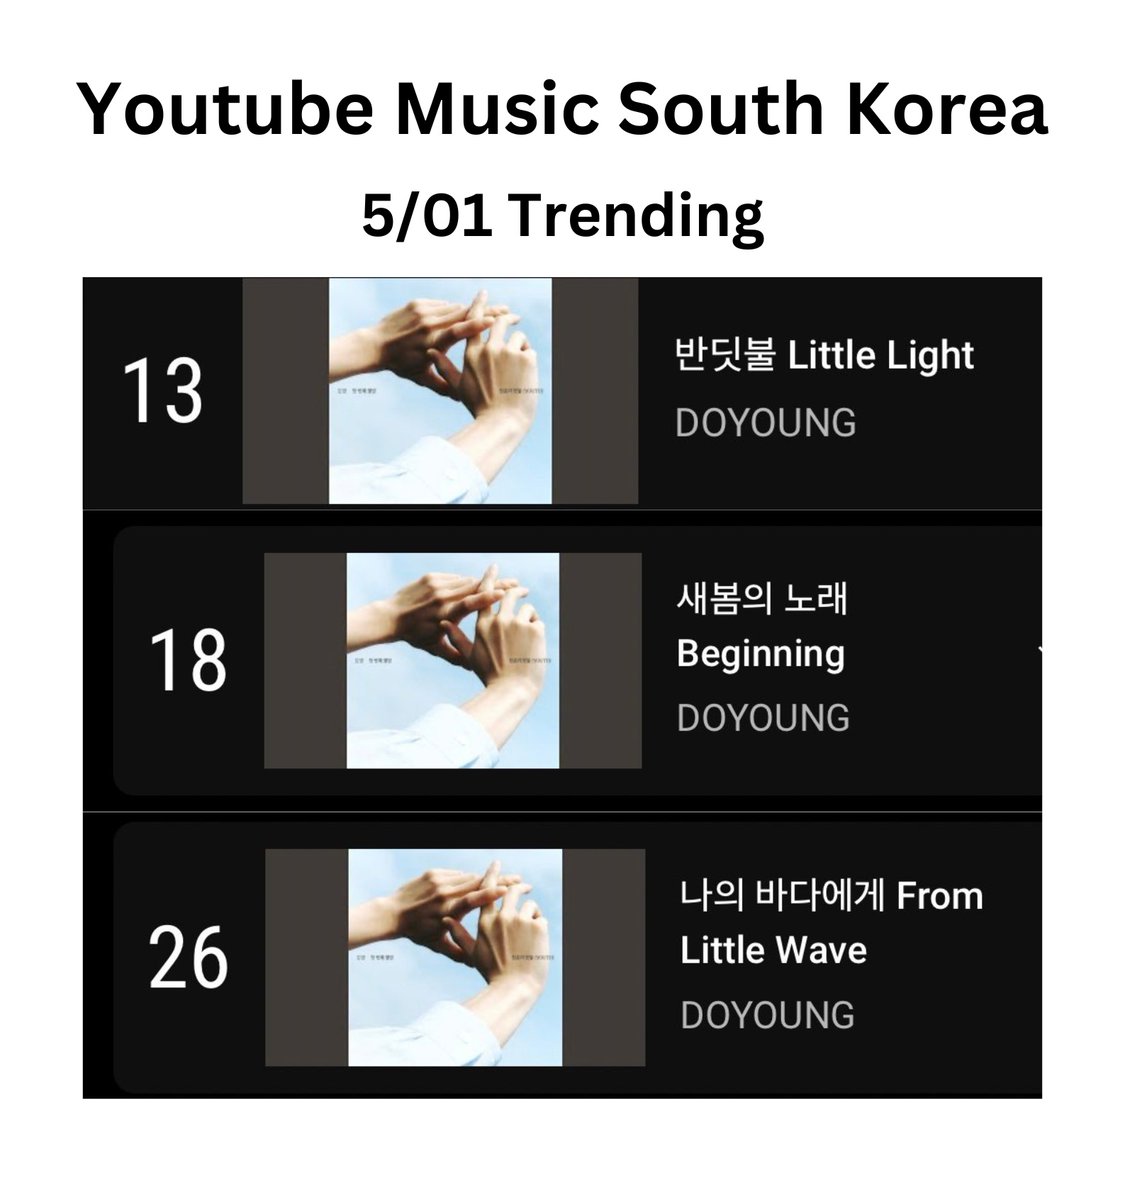 240501 Youtube Music South Korea Trending songs: 13. Little Light 18. Beginning 26. From Little Wave #DOYOUNG_청춘의포말_YOUTH #DOYOUNG #도영 #ドヨン